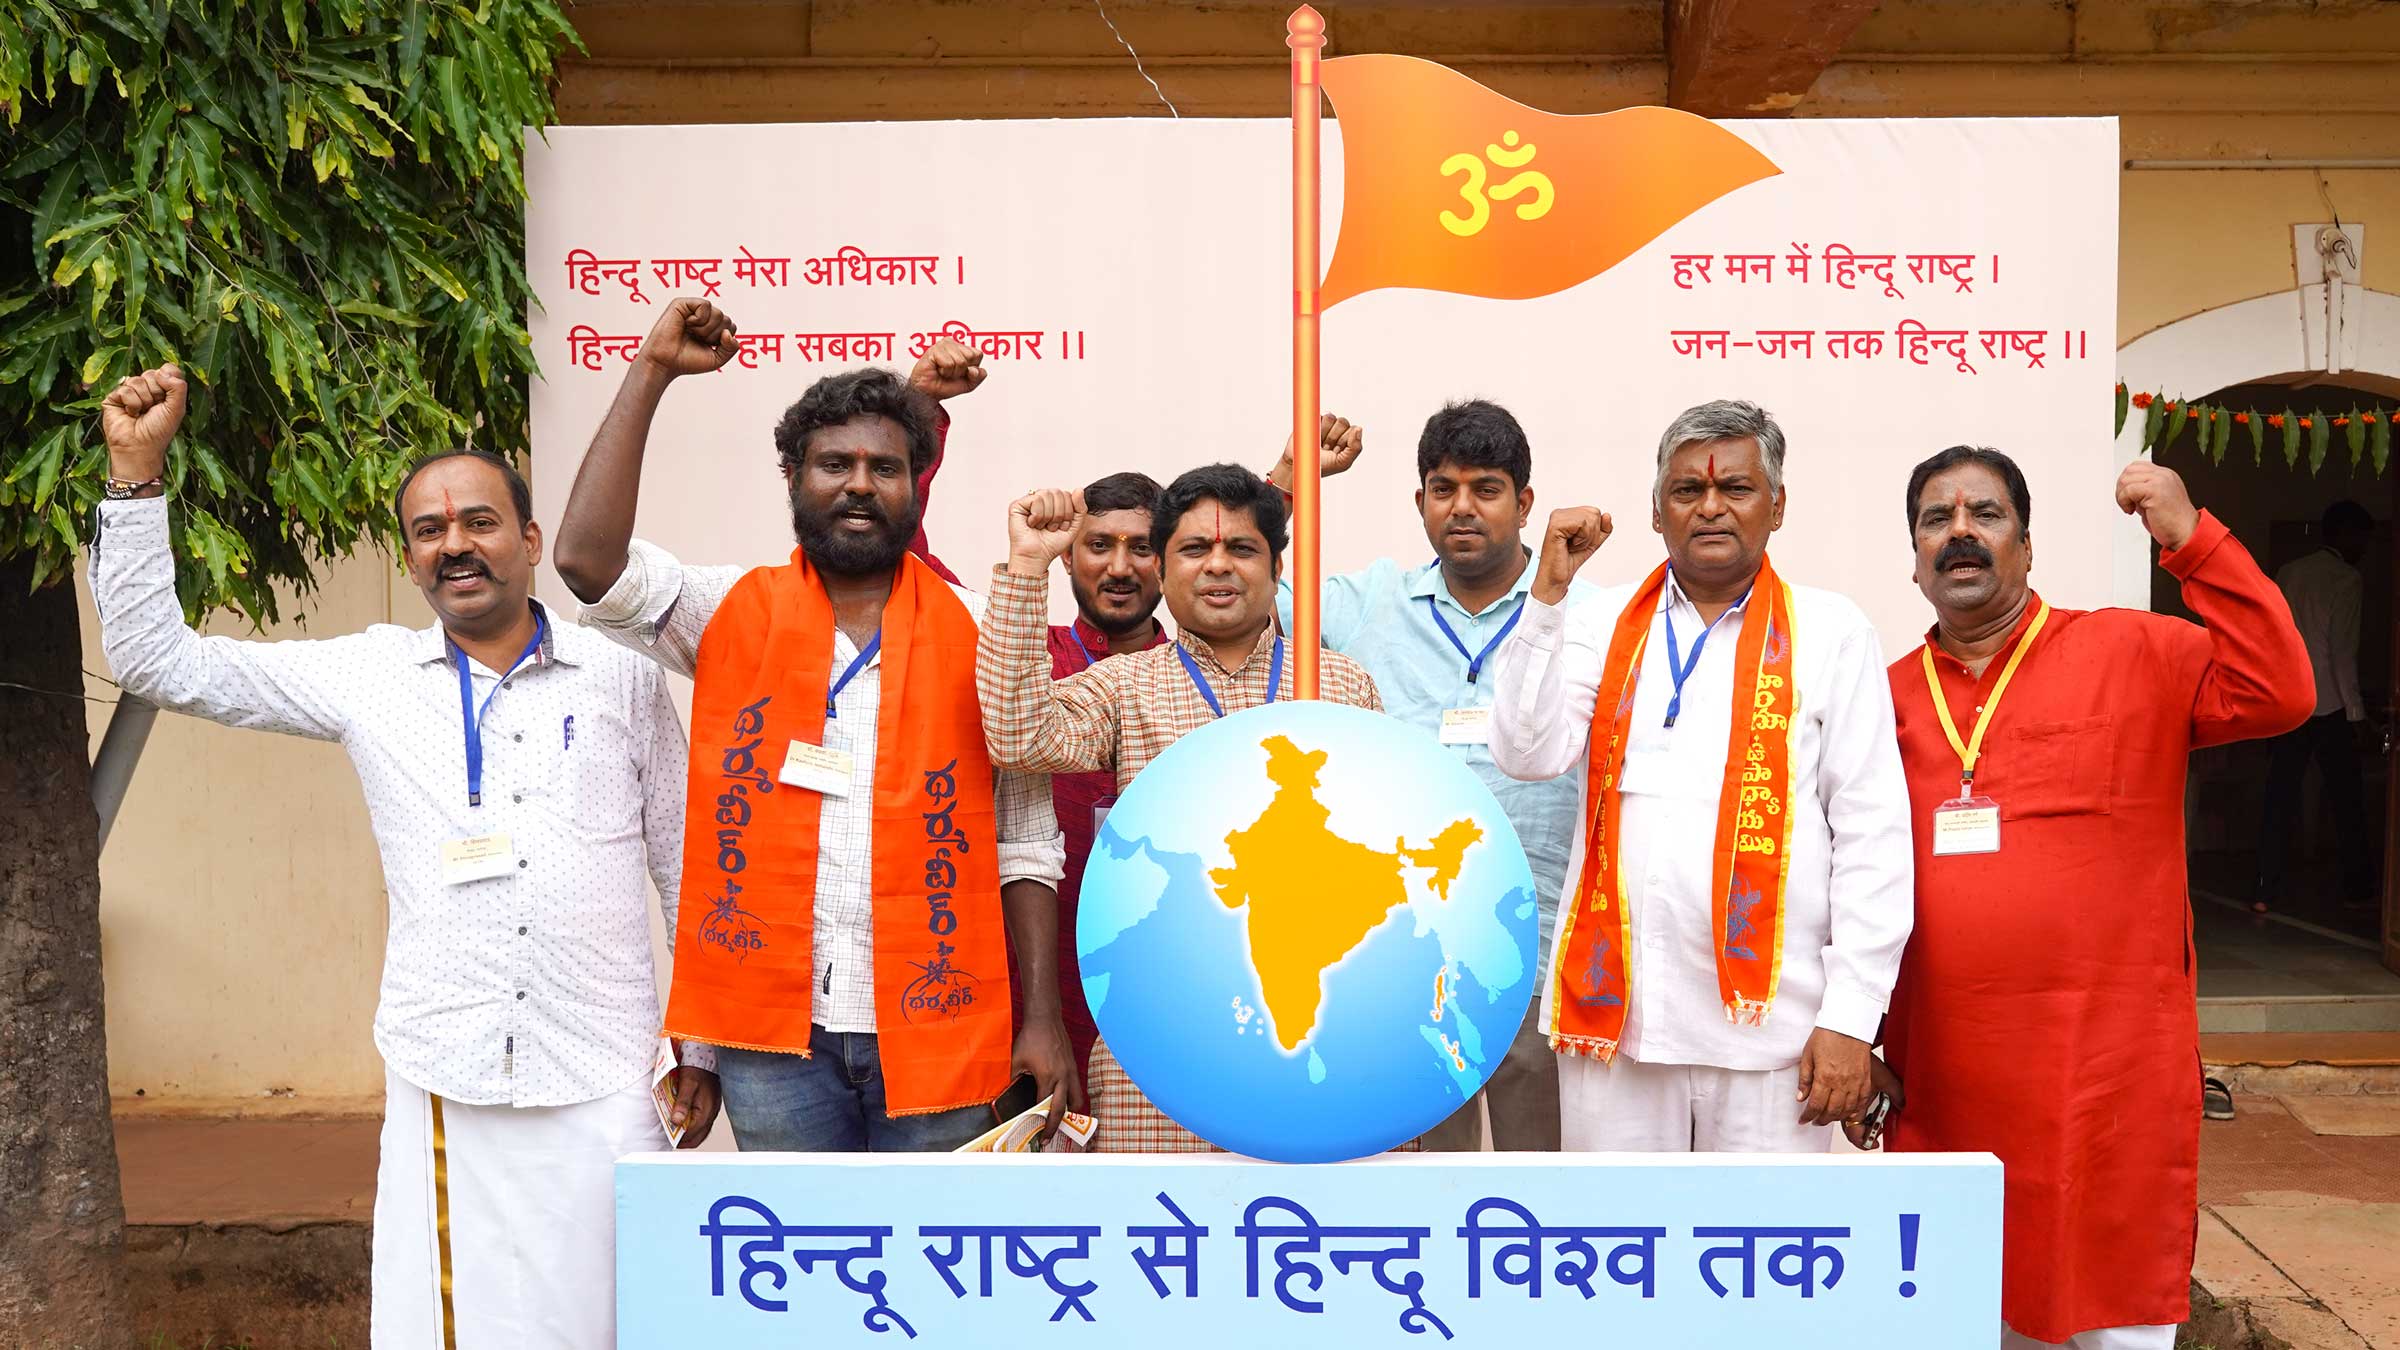 The flag of Dharma will flutter over the whole world and so will the hailing of the ‘Hindu Rashtra’ !